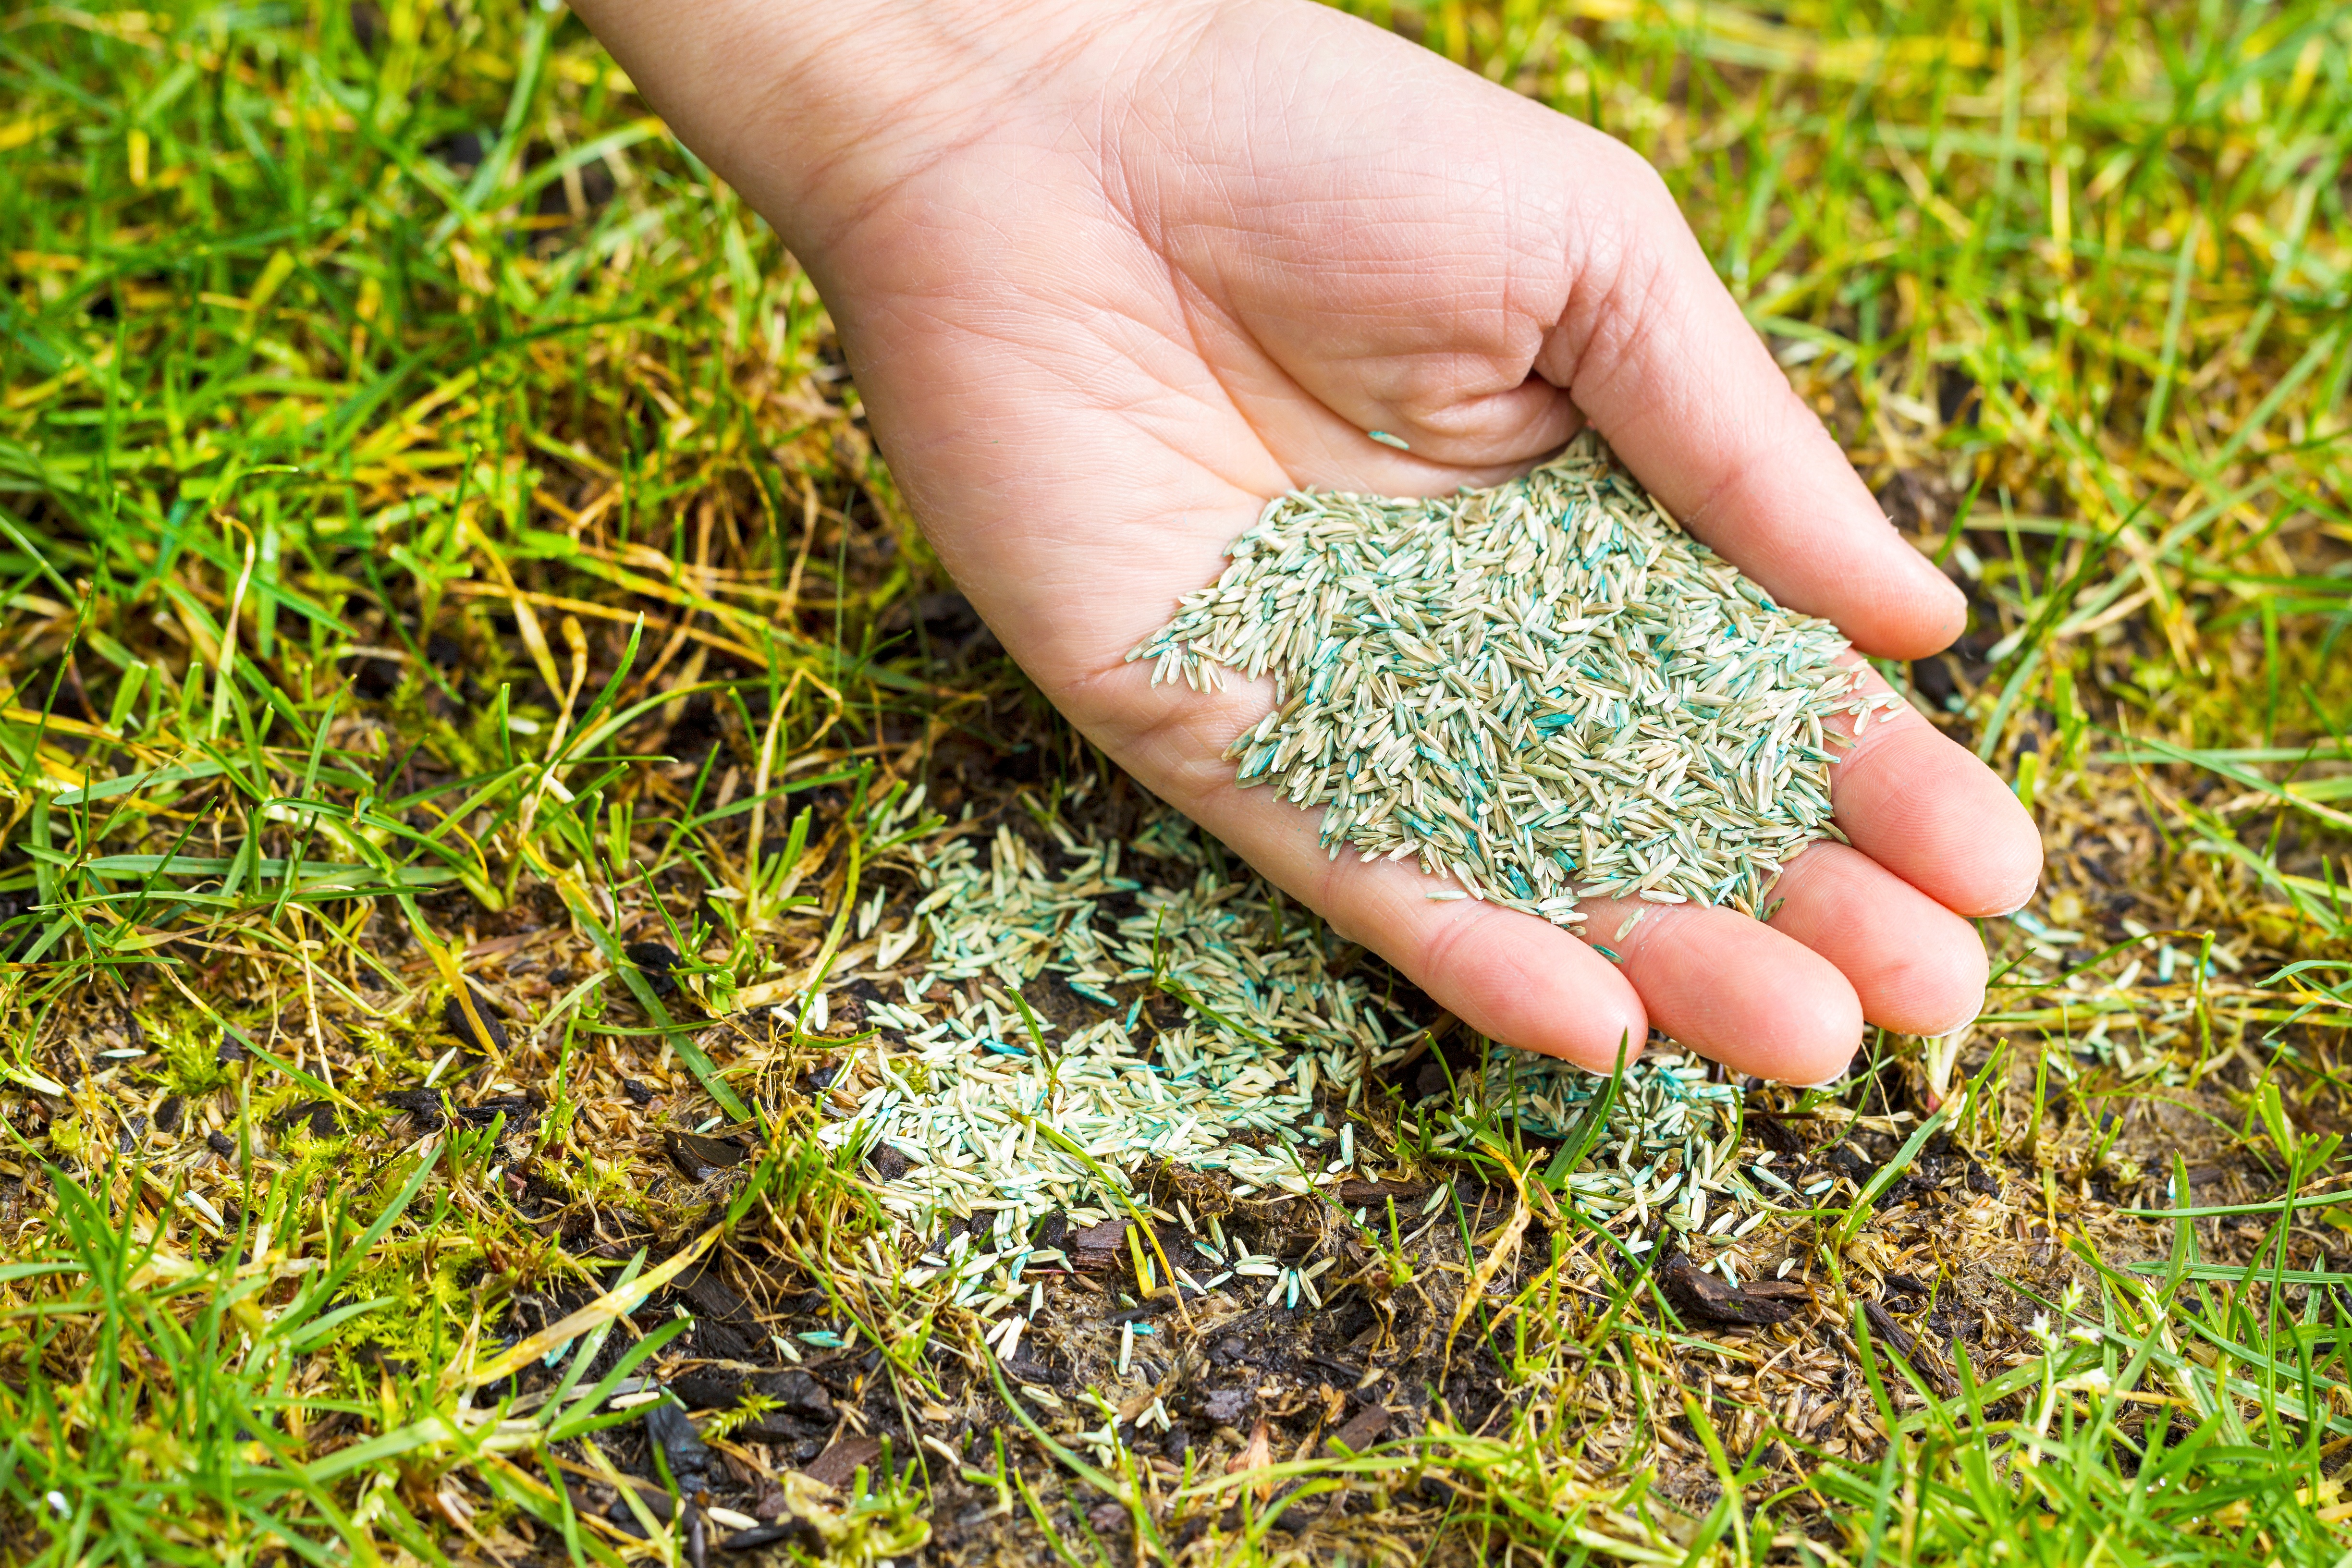 Overseeding is the practice of adding new grass seed into a lawn.